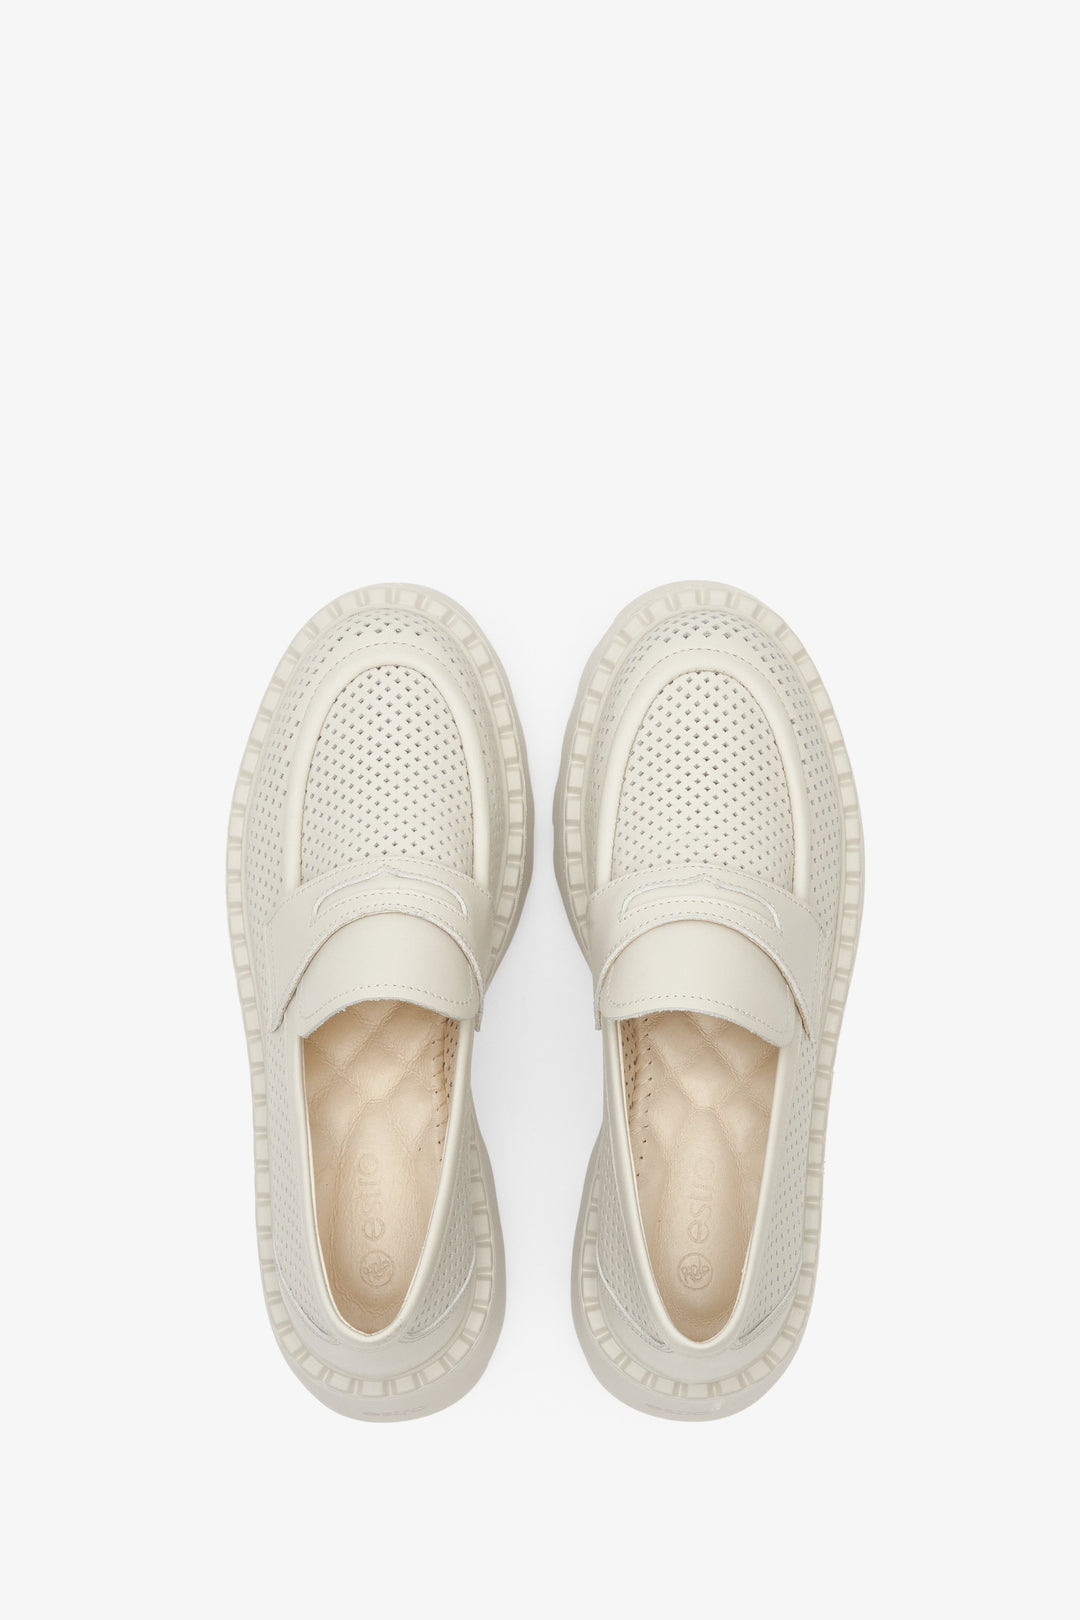 Women's leather loafers with perforation in light beige color - shoe presentation from above.